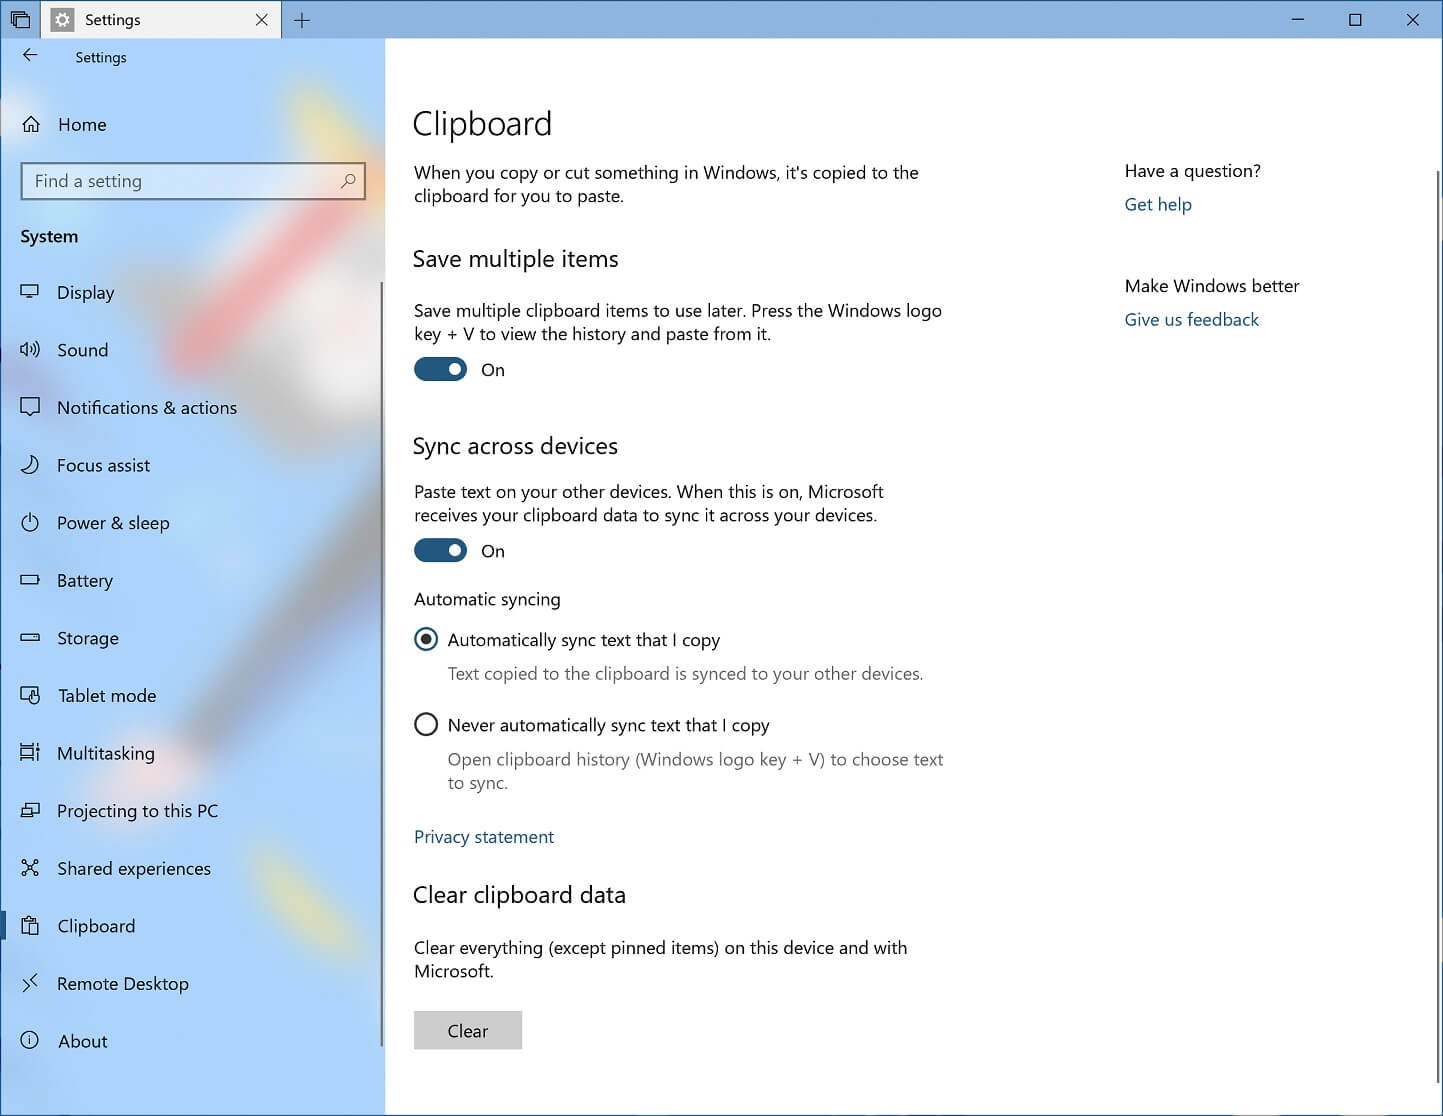 Windows 10 Cloud Clipboard feature now supports larger images Clipboard-in-Windows-10.jpg